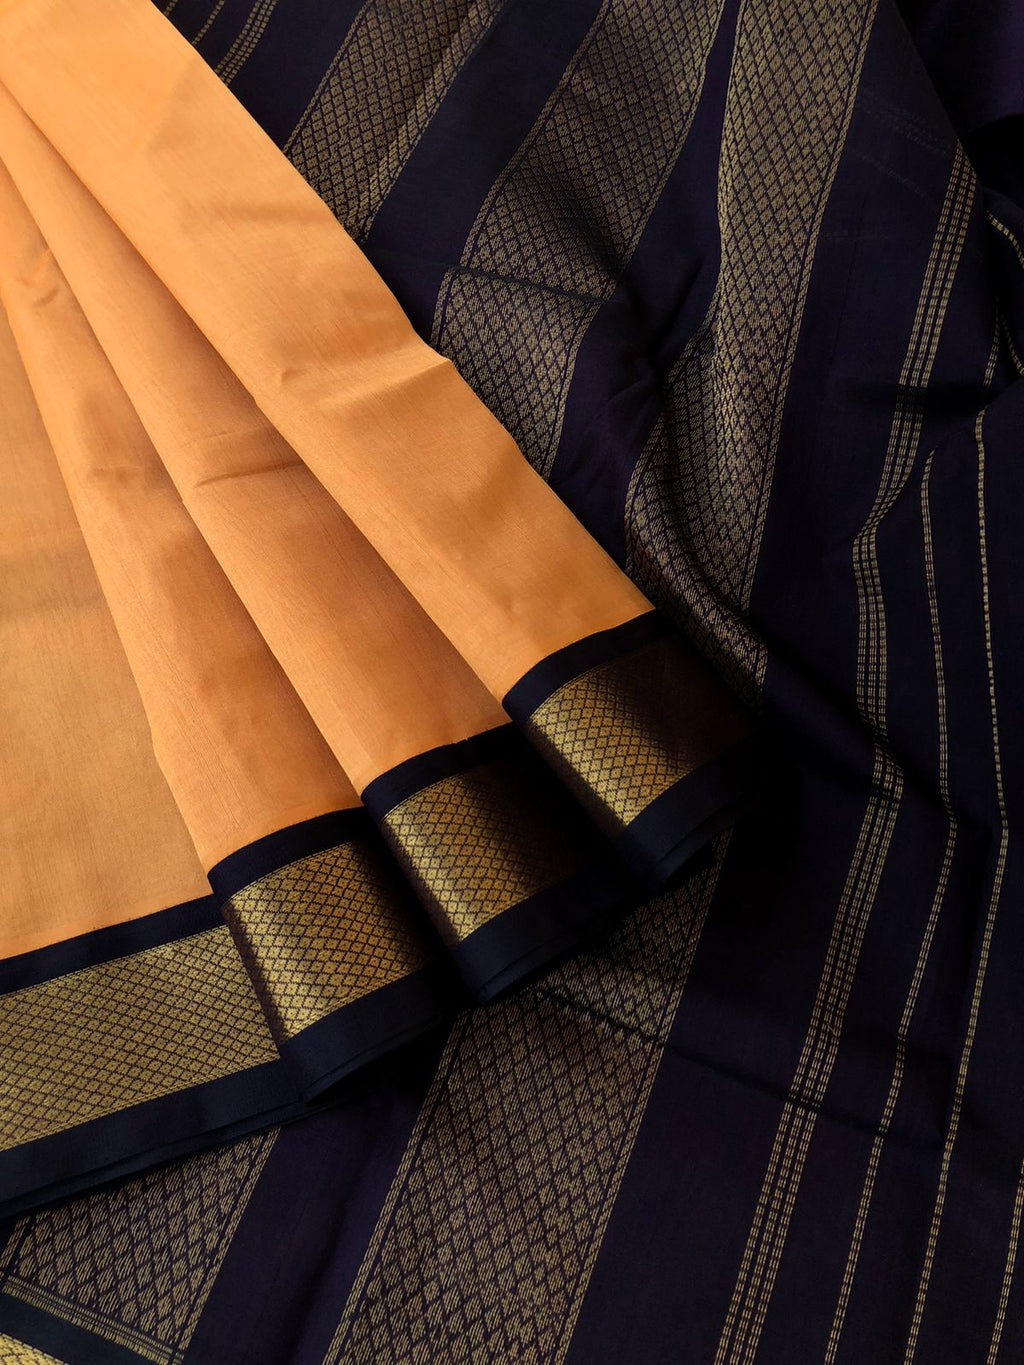 Korvai Silk Cottons - pale apricot and mid night blue black